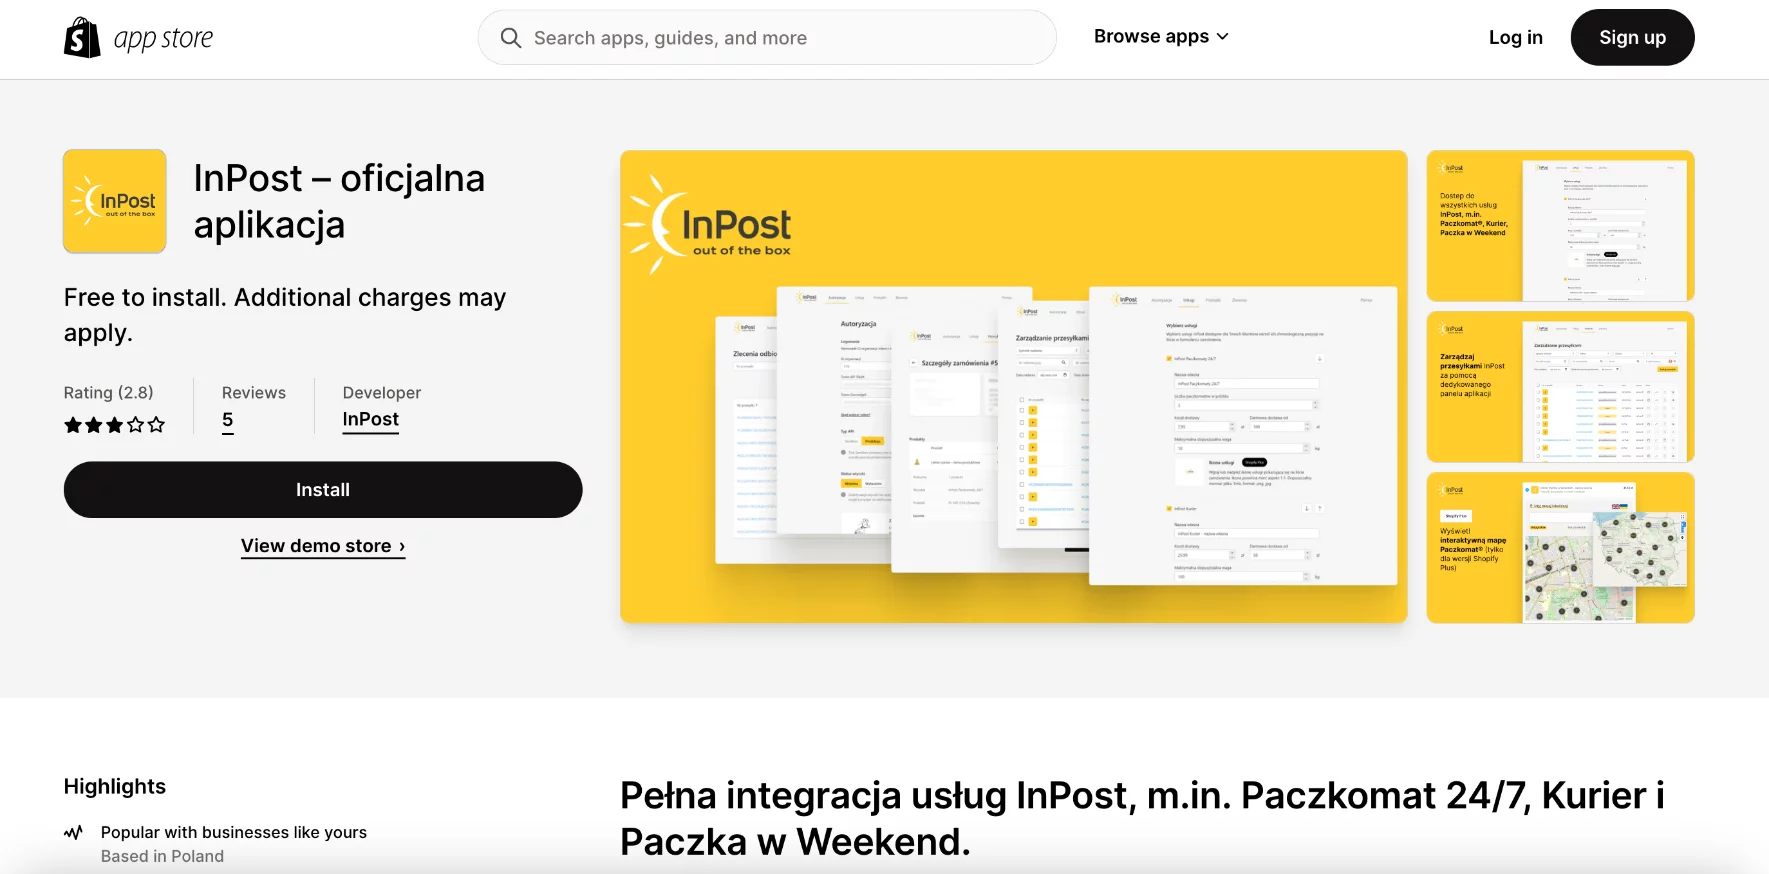 InPost app in the Shopify App Store